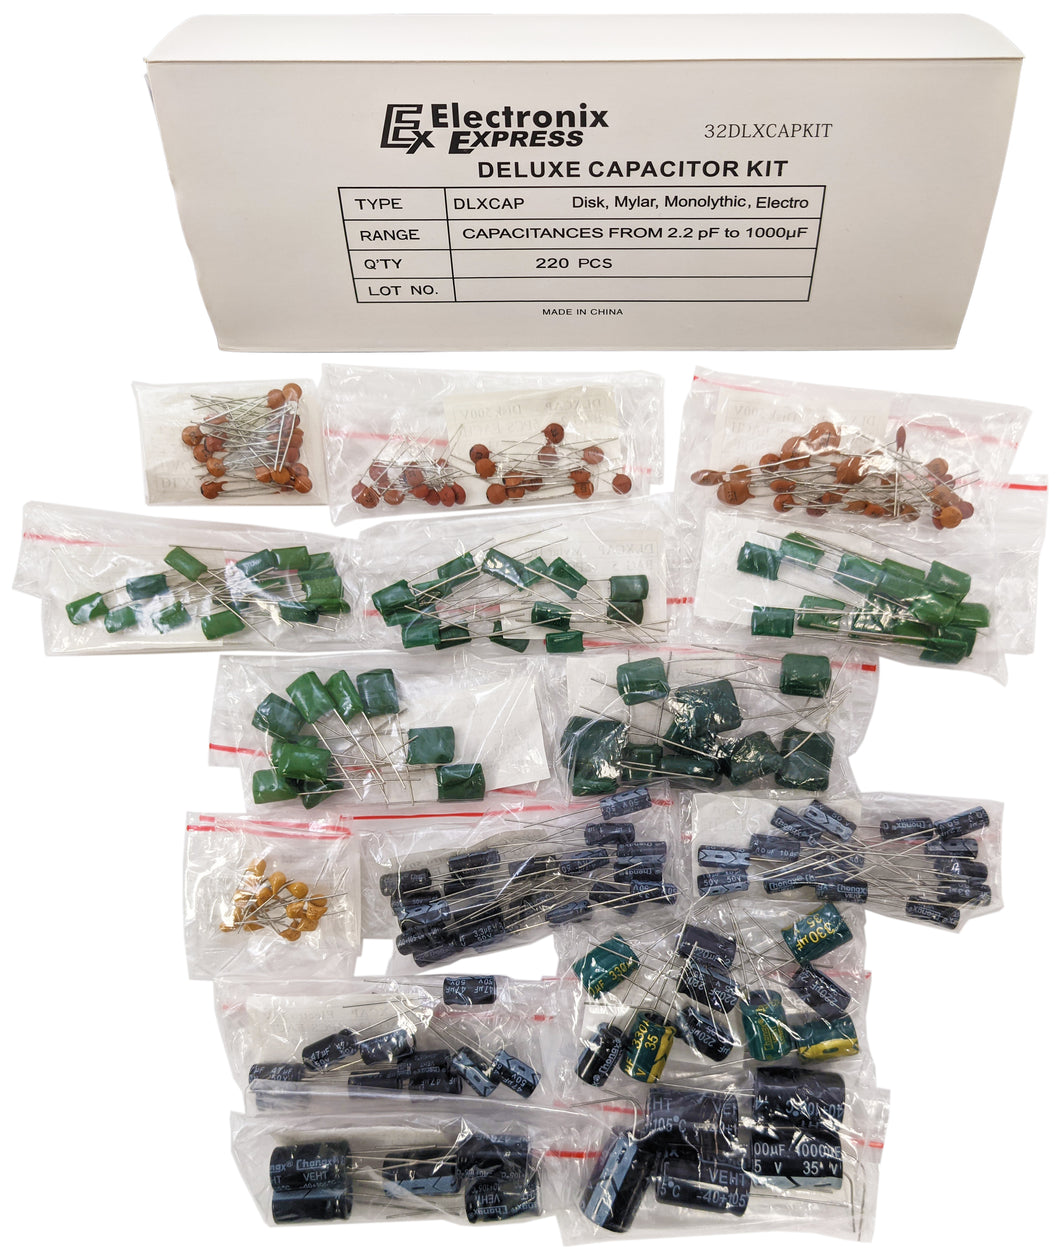 220 Piece Deluxe Capacitor Kit - Includes Disk, Mylar, Monolithic, and Electro Radial Capacitors